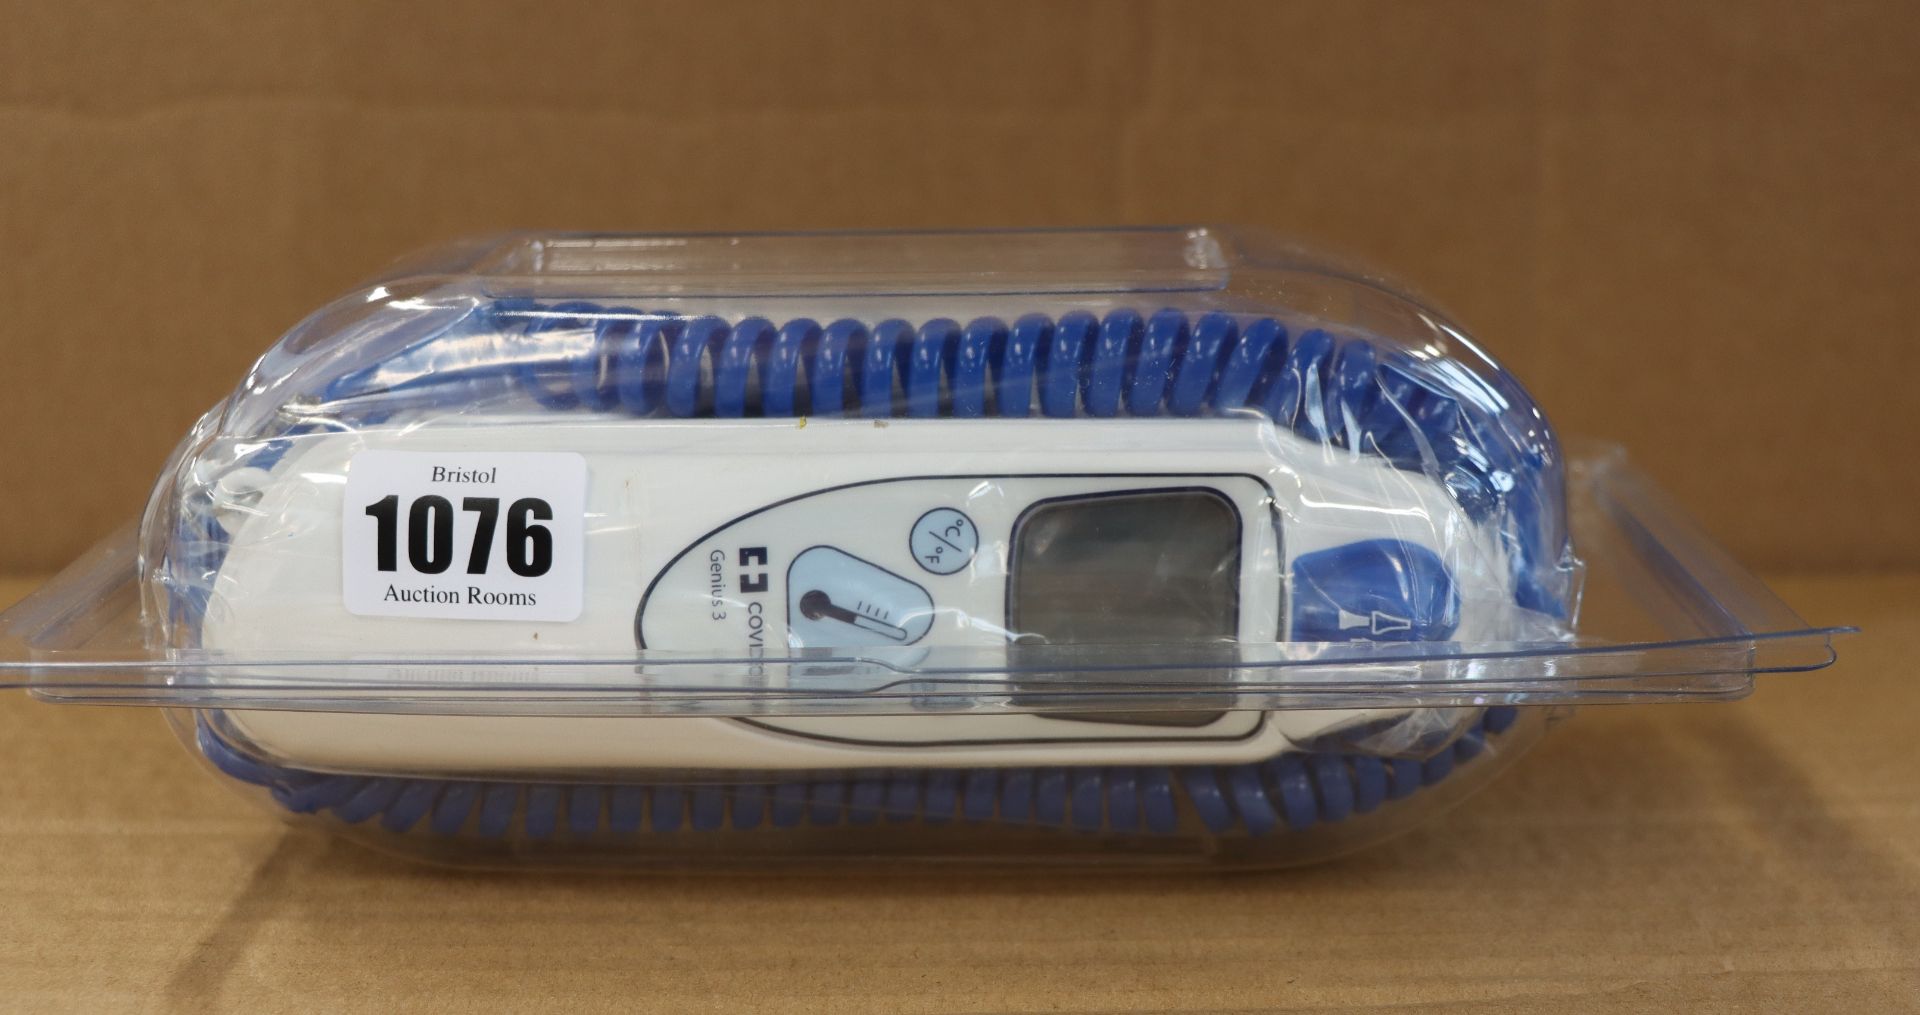 One as new Covidien Genius 3 Tympanic Thermometer.